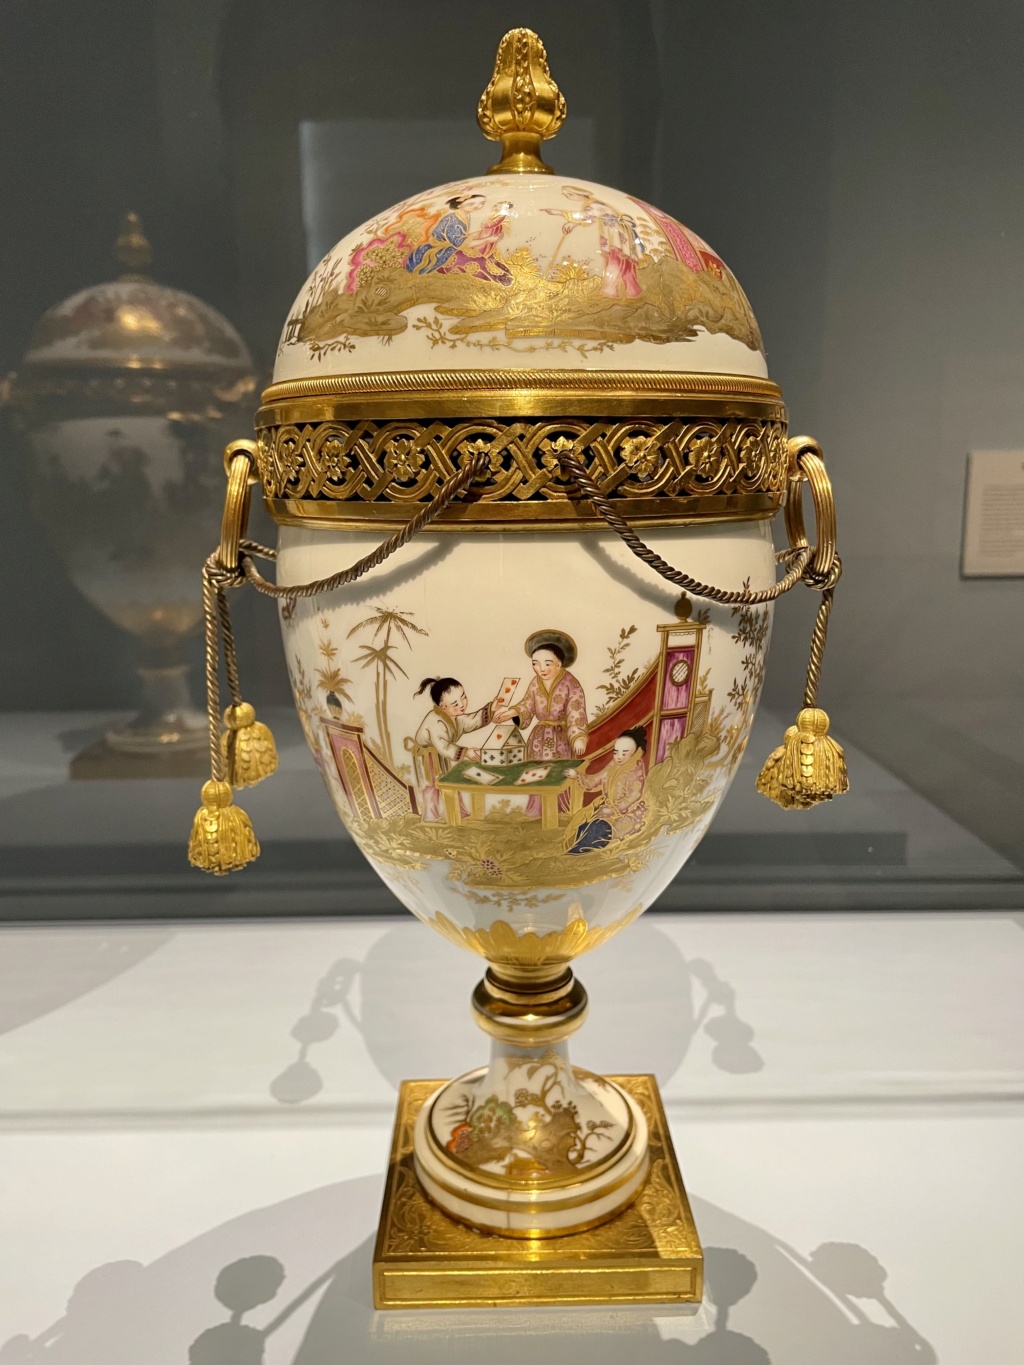 Exposition : Porcelain from Versailles Vases for a King & Queen. Getty Center, Los Angeles E3486d10